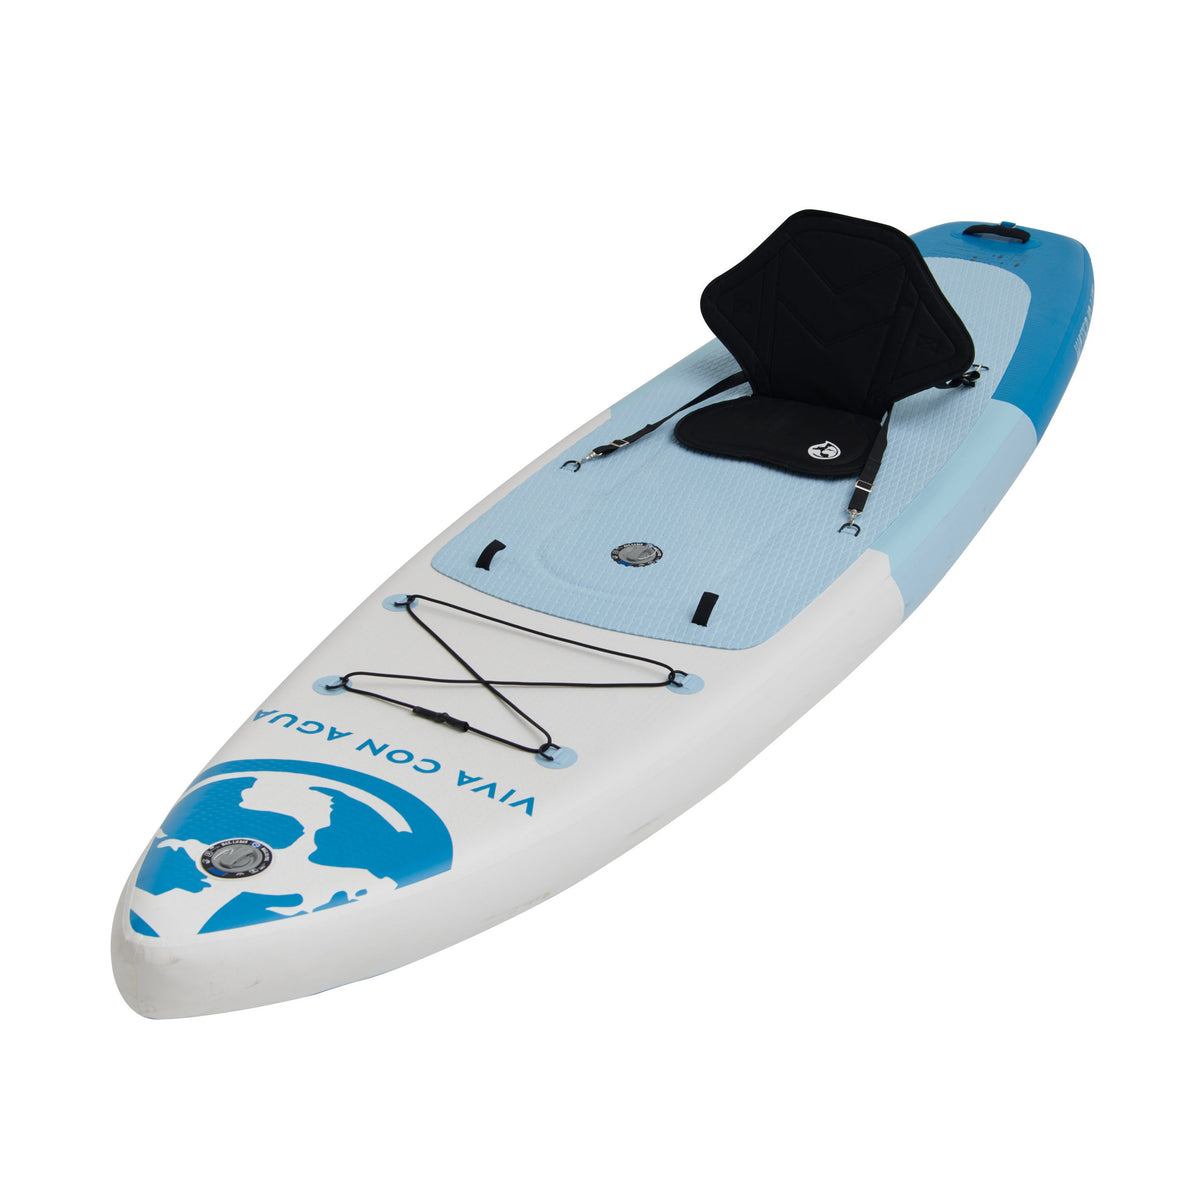 Viva con Agua - Stand Up Paddle Board inkl. Zubehör